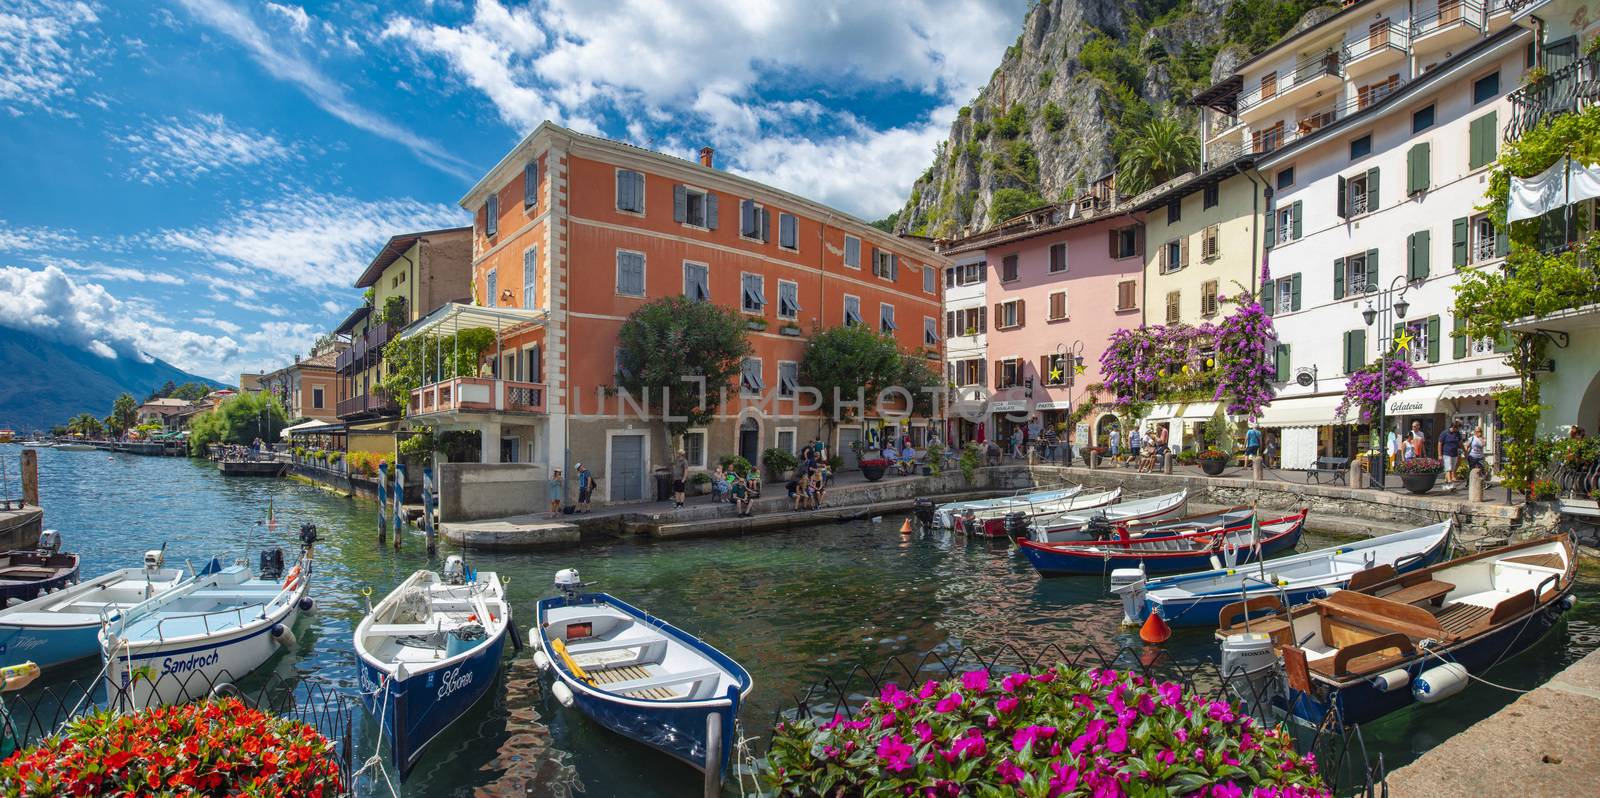 Limone, Lake Garda, Italy, August 2019, view of the small town o by ElectricEggPhoto